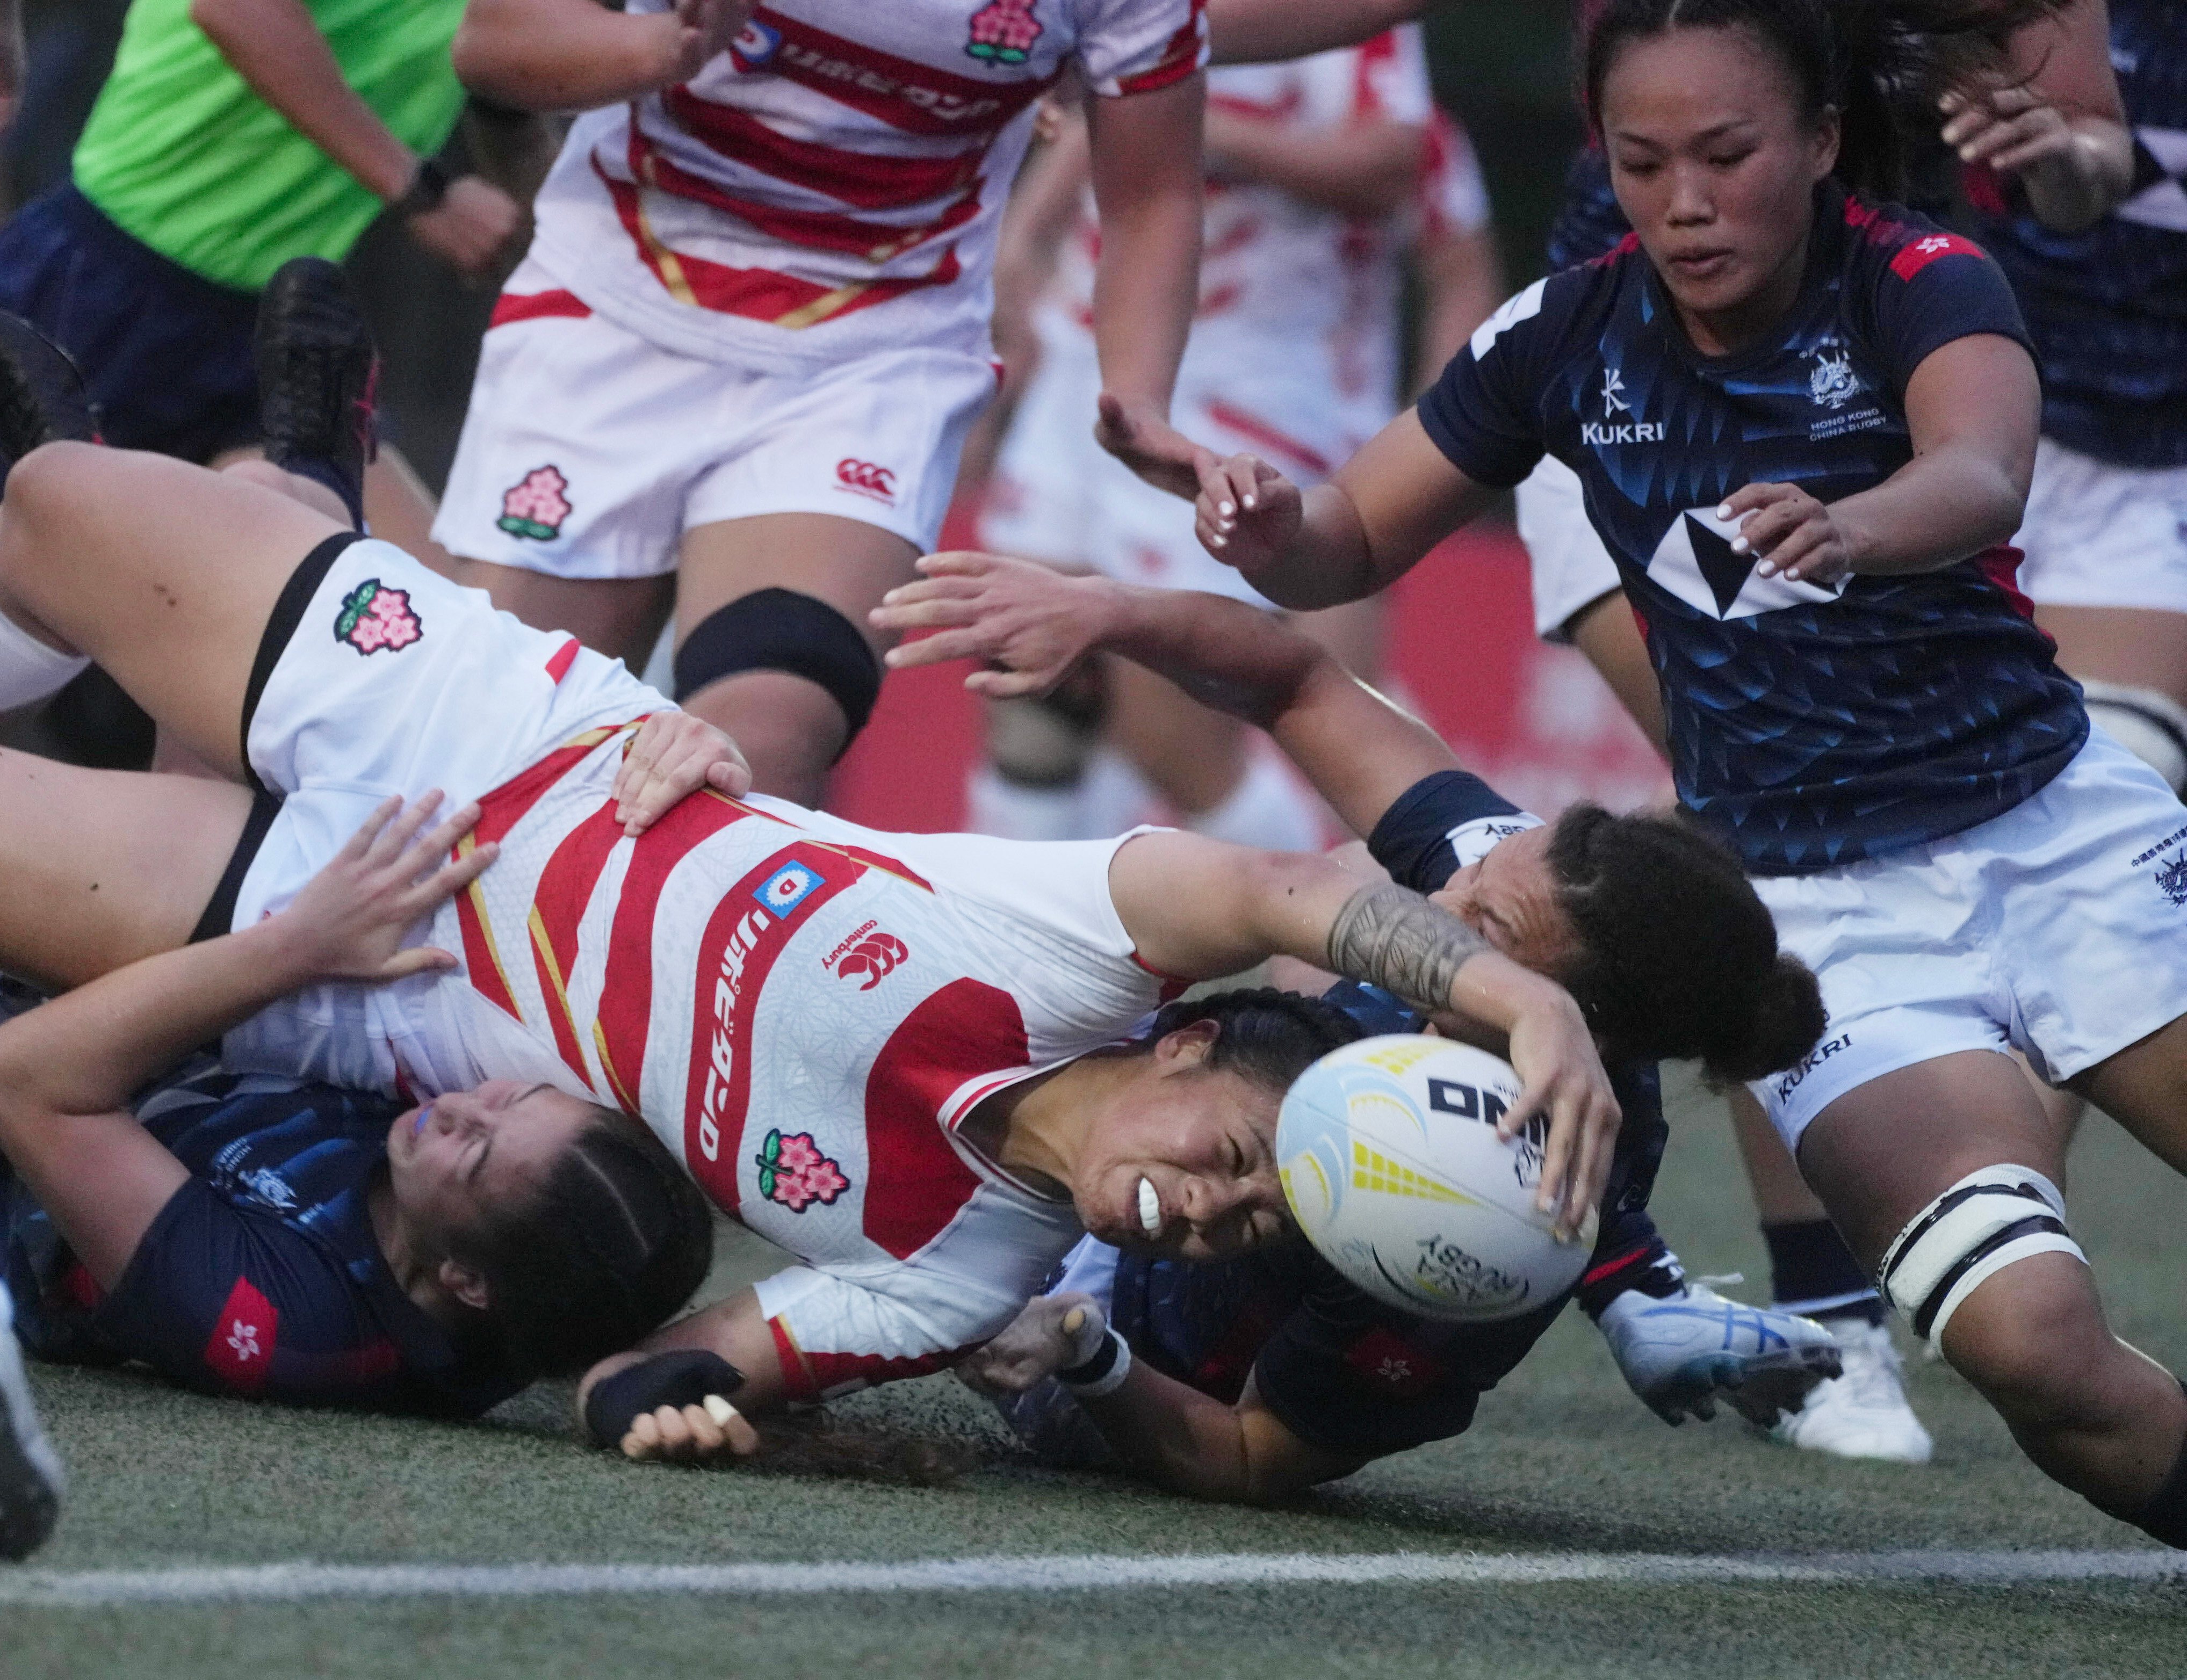 Japan’s Mele Kagawa reaches over to ground the ball for her side’s first try in their Asia Rugby Championship win over Hong Kong at King’s Park. Photo: Elson Li